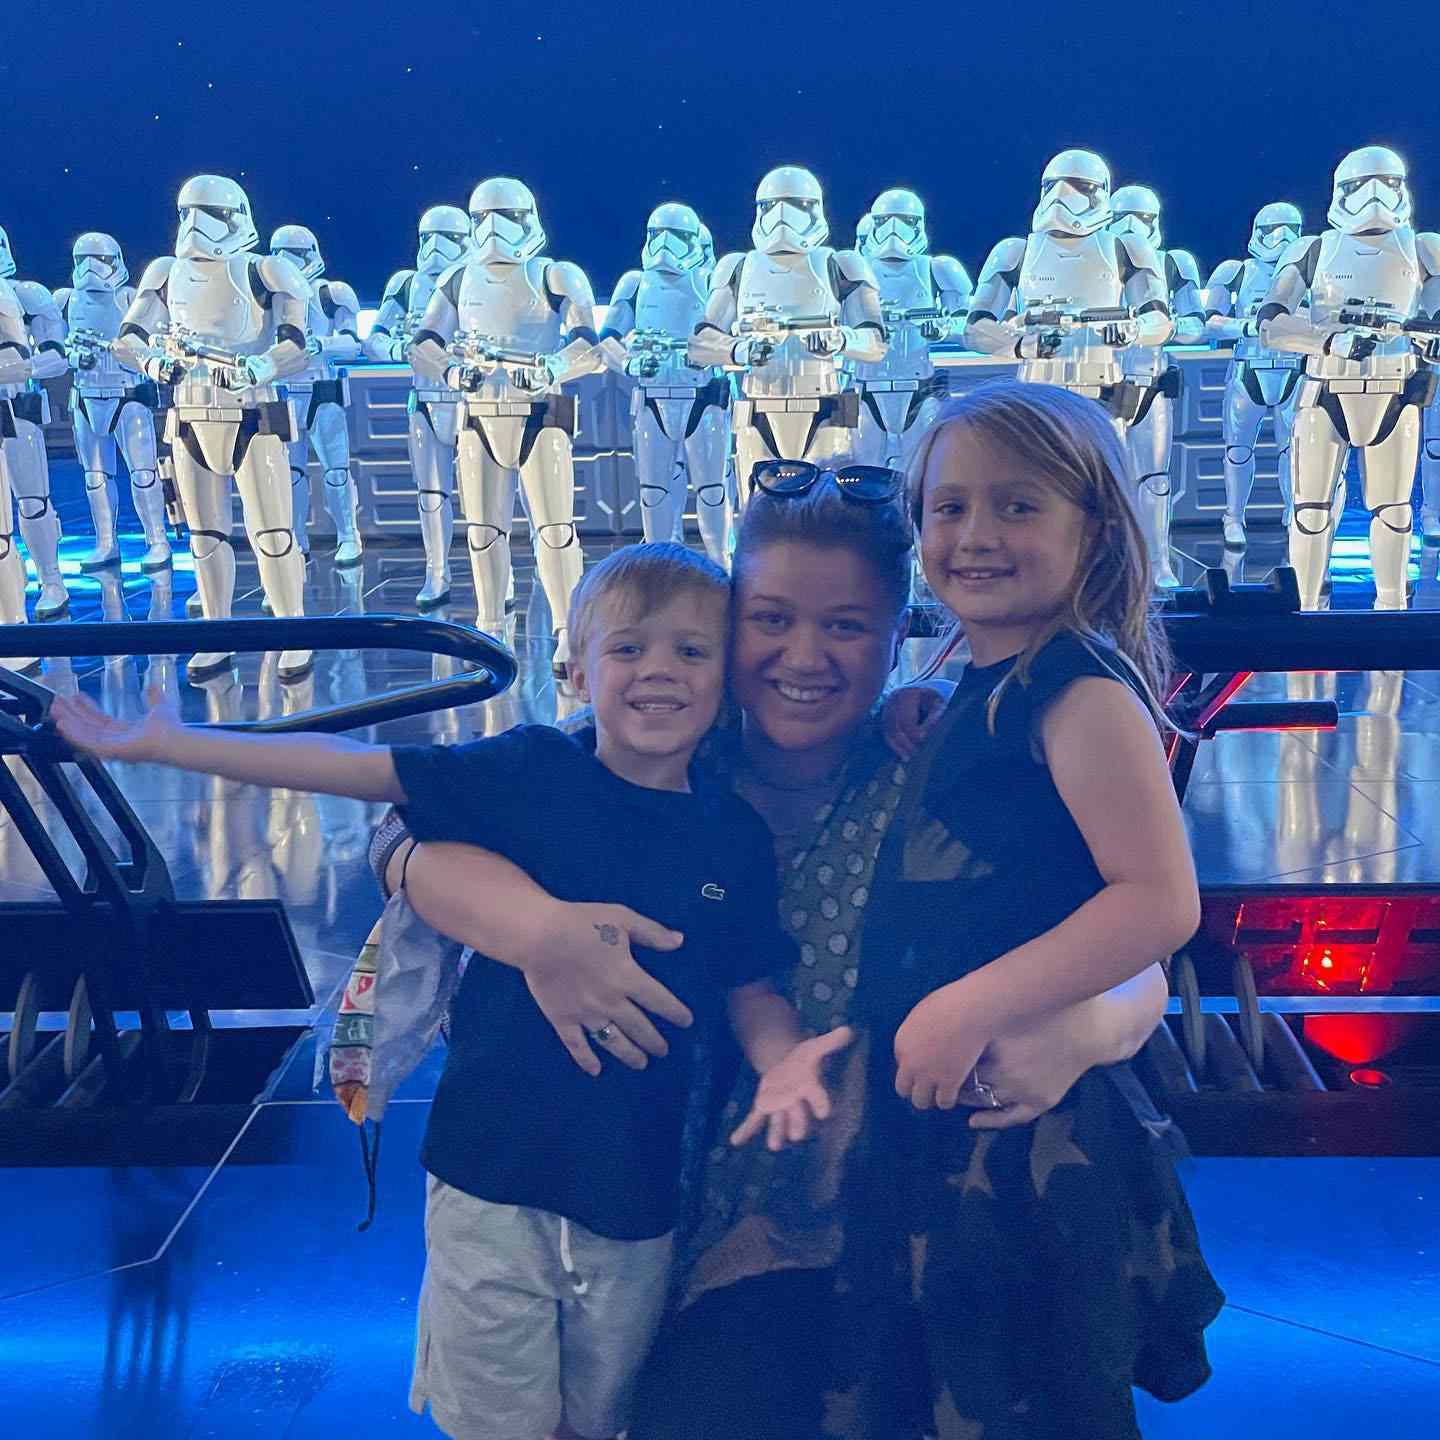 https://www.instagram.com/p/CRUeo0GL1Bn/ kellyclarkson Verified “These aren't the droids you're looking for.” We had so much fun at Disney World! All the rides were amazing but oh my gosh, y’all, Pandora and the Star Wars rides are where it’s at! Thank you for a magical vacation, Disney ❤️